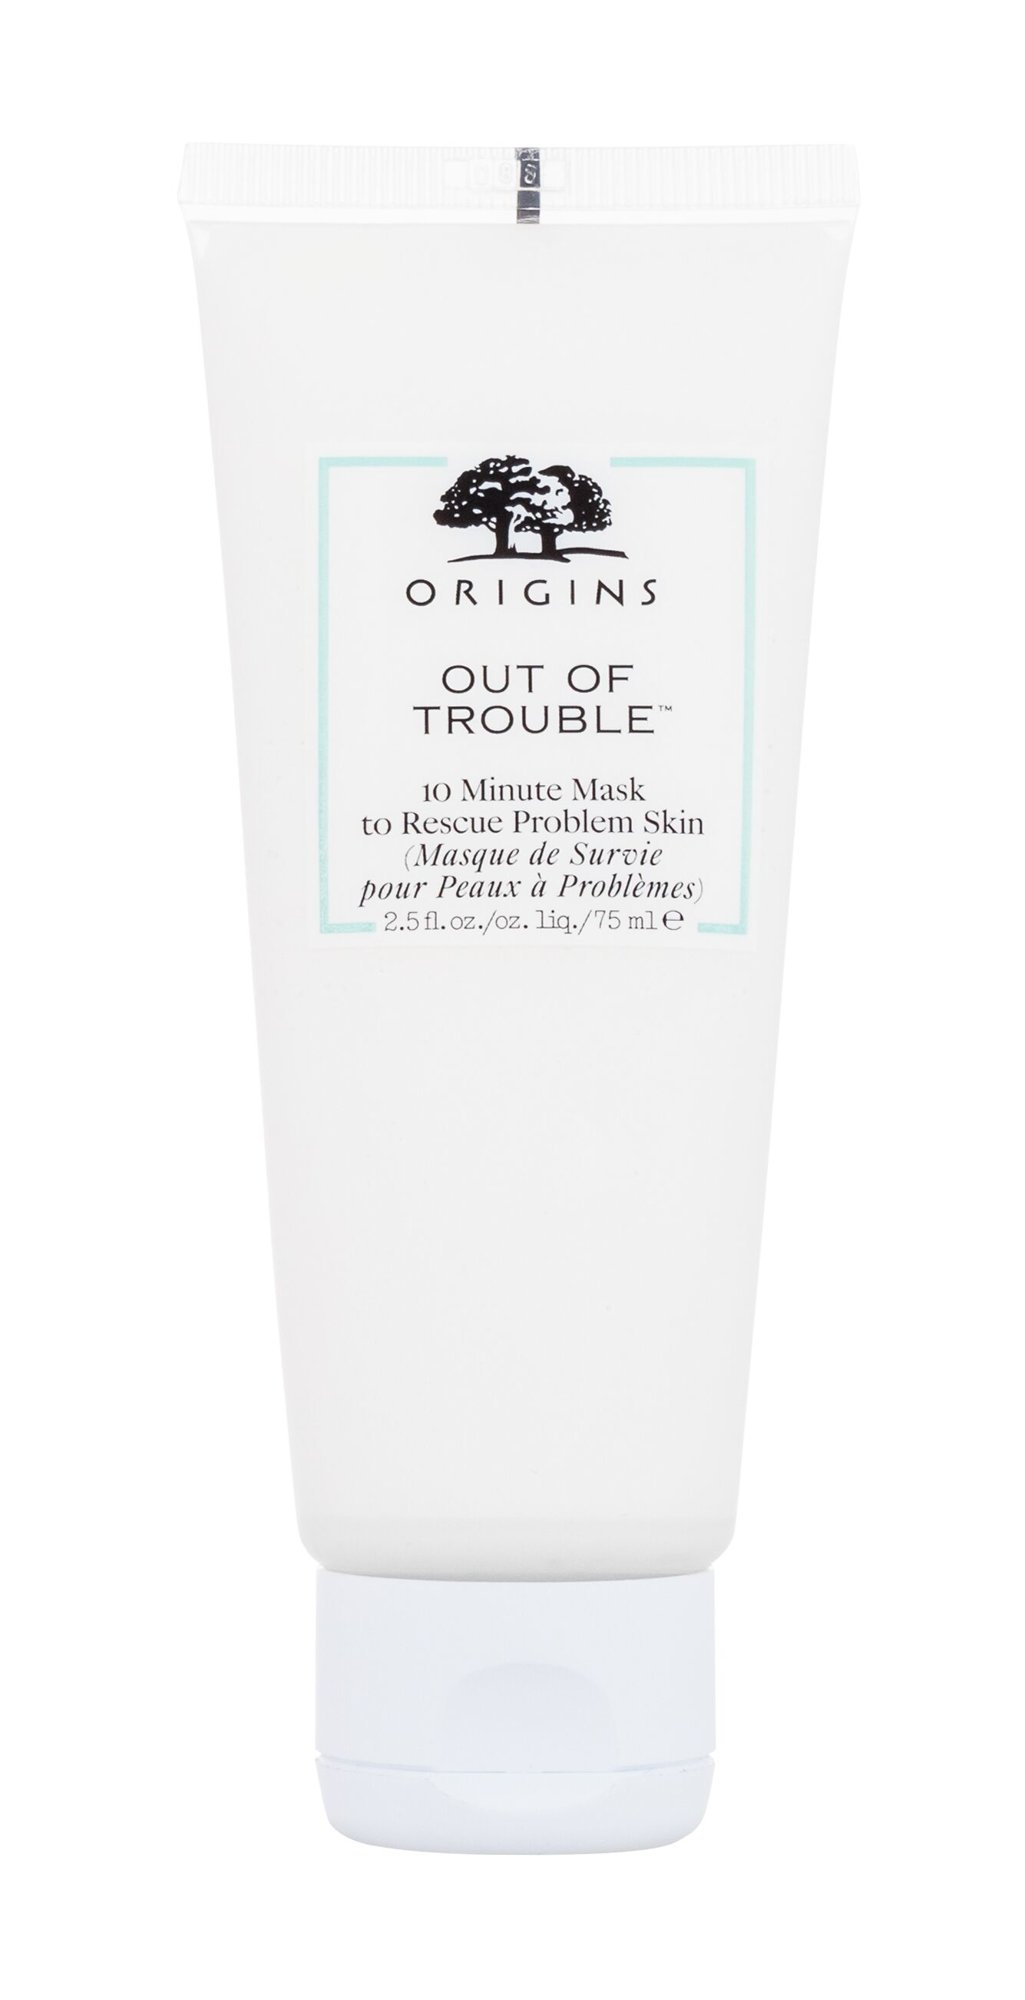 Origins Out Of Trouble 10 Minute Mask To Rescue Problem Skin Veido kaukė